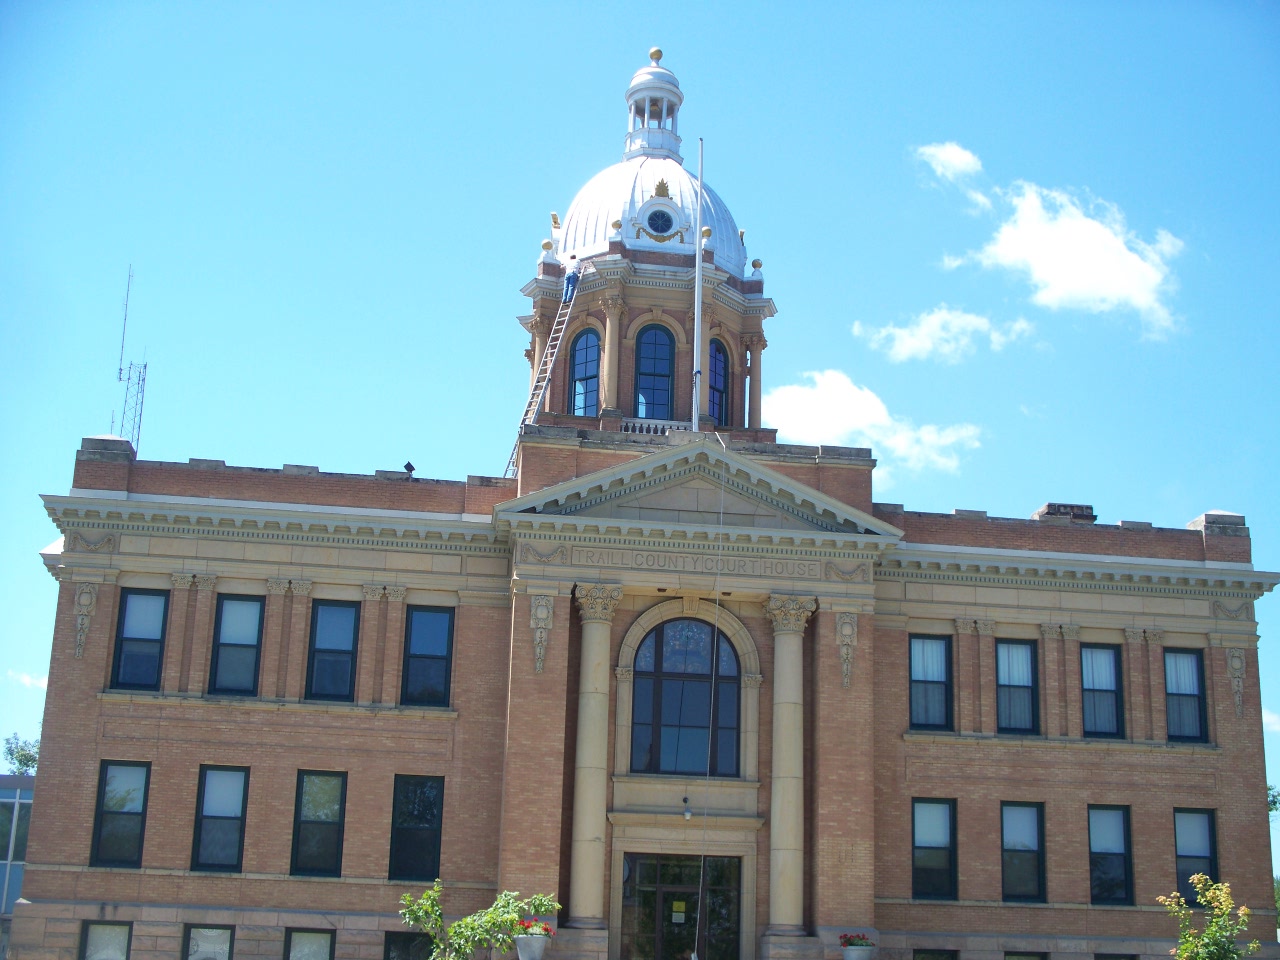 Traill courthouse full pic.jpg